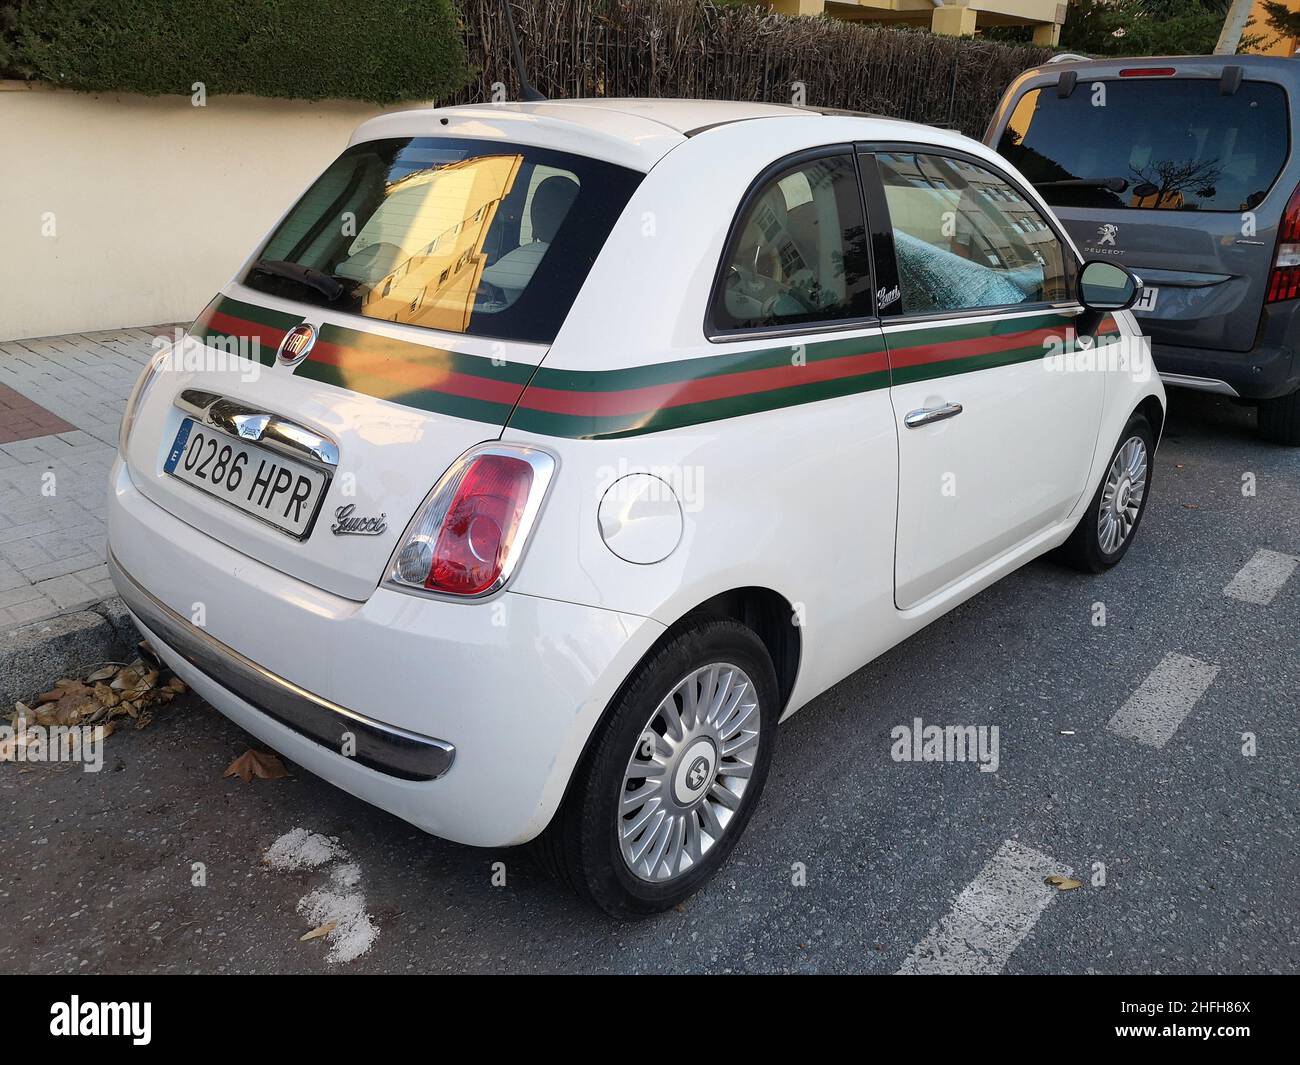 2013 Fiat 500 Gucci parked in Malaga, Spain Stock Photo - Alamy